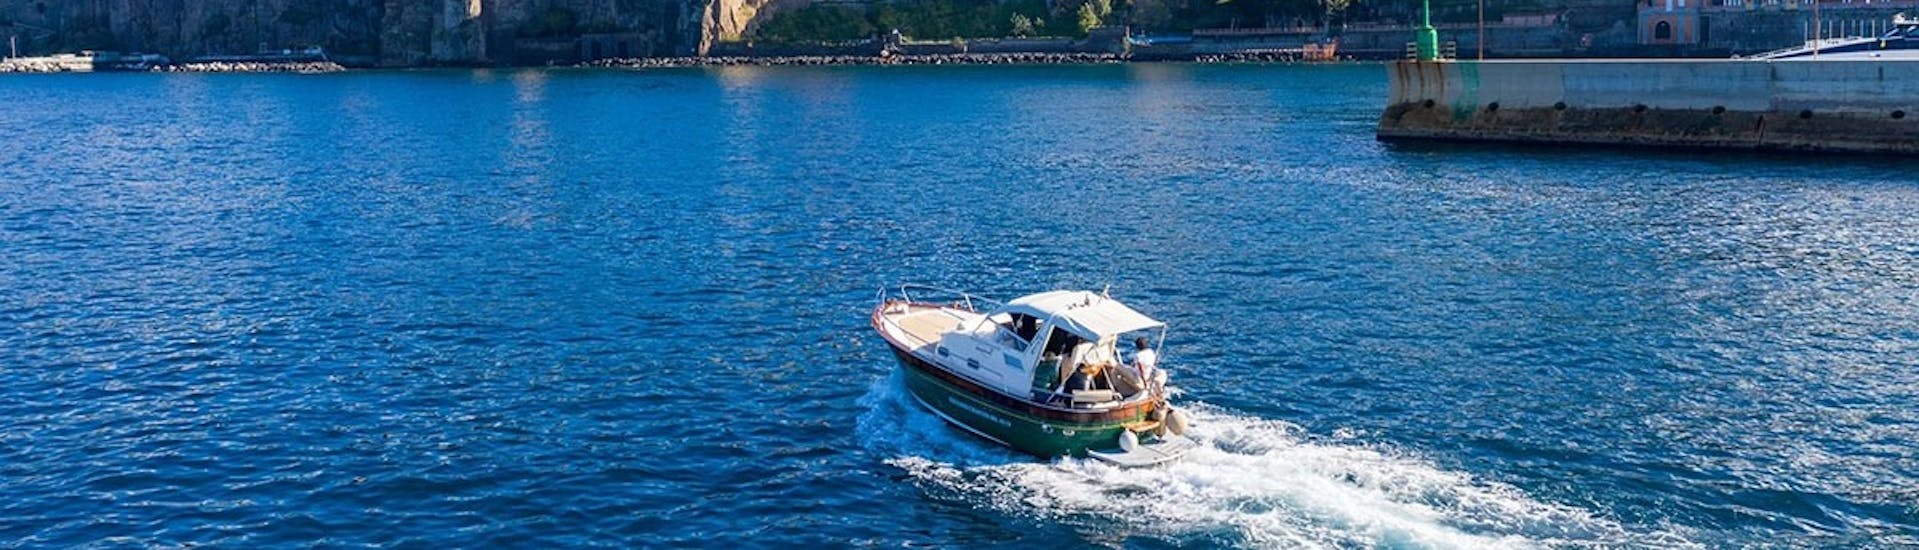 Giuliani Charter Sorrento boat in open water during the Boat Trip around the Sorrento coast with Limoncello Tasting.